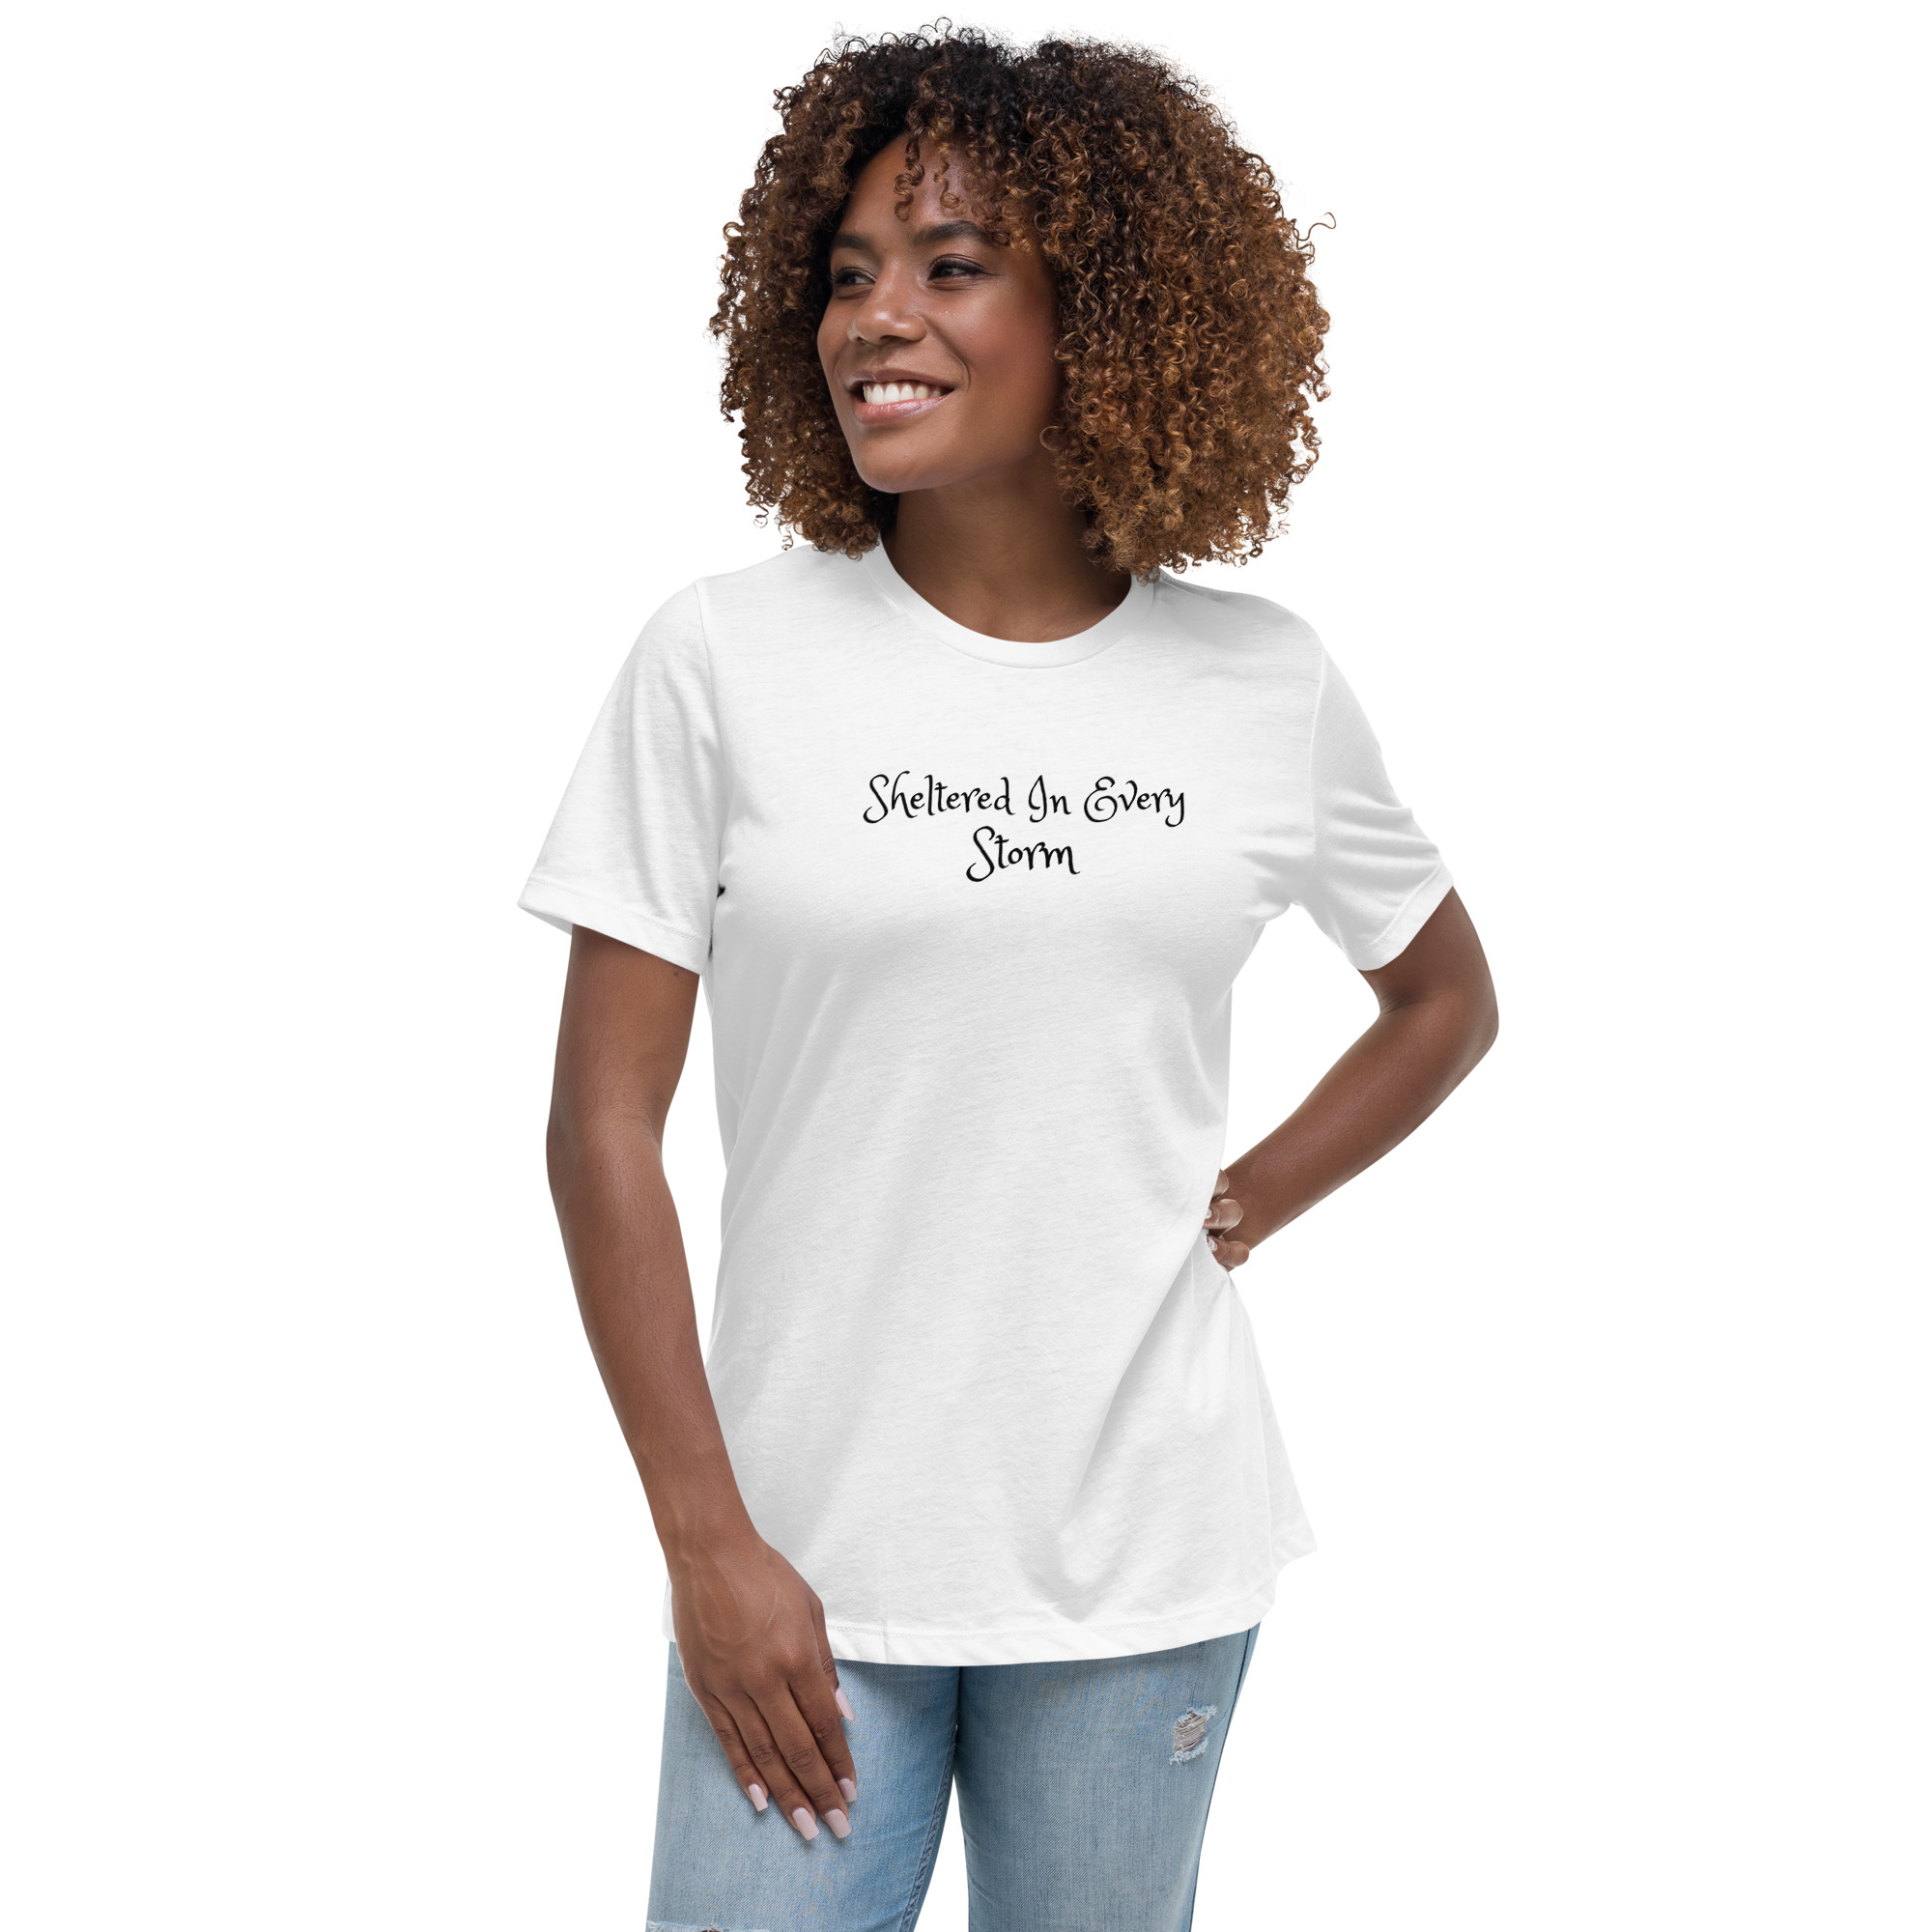 womens-relaxed-t-shirt-white-front-63227a7663ae4.jpg